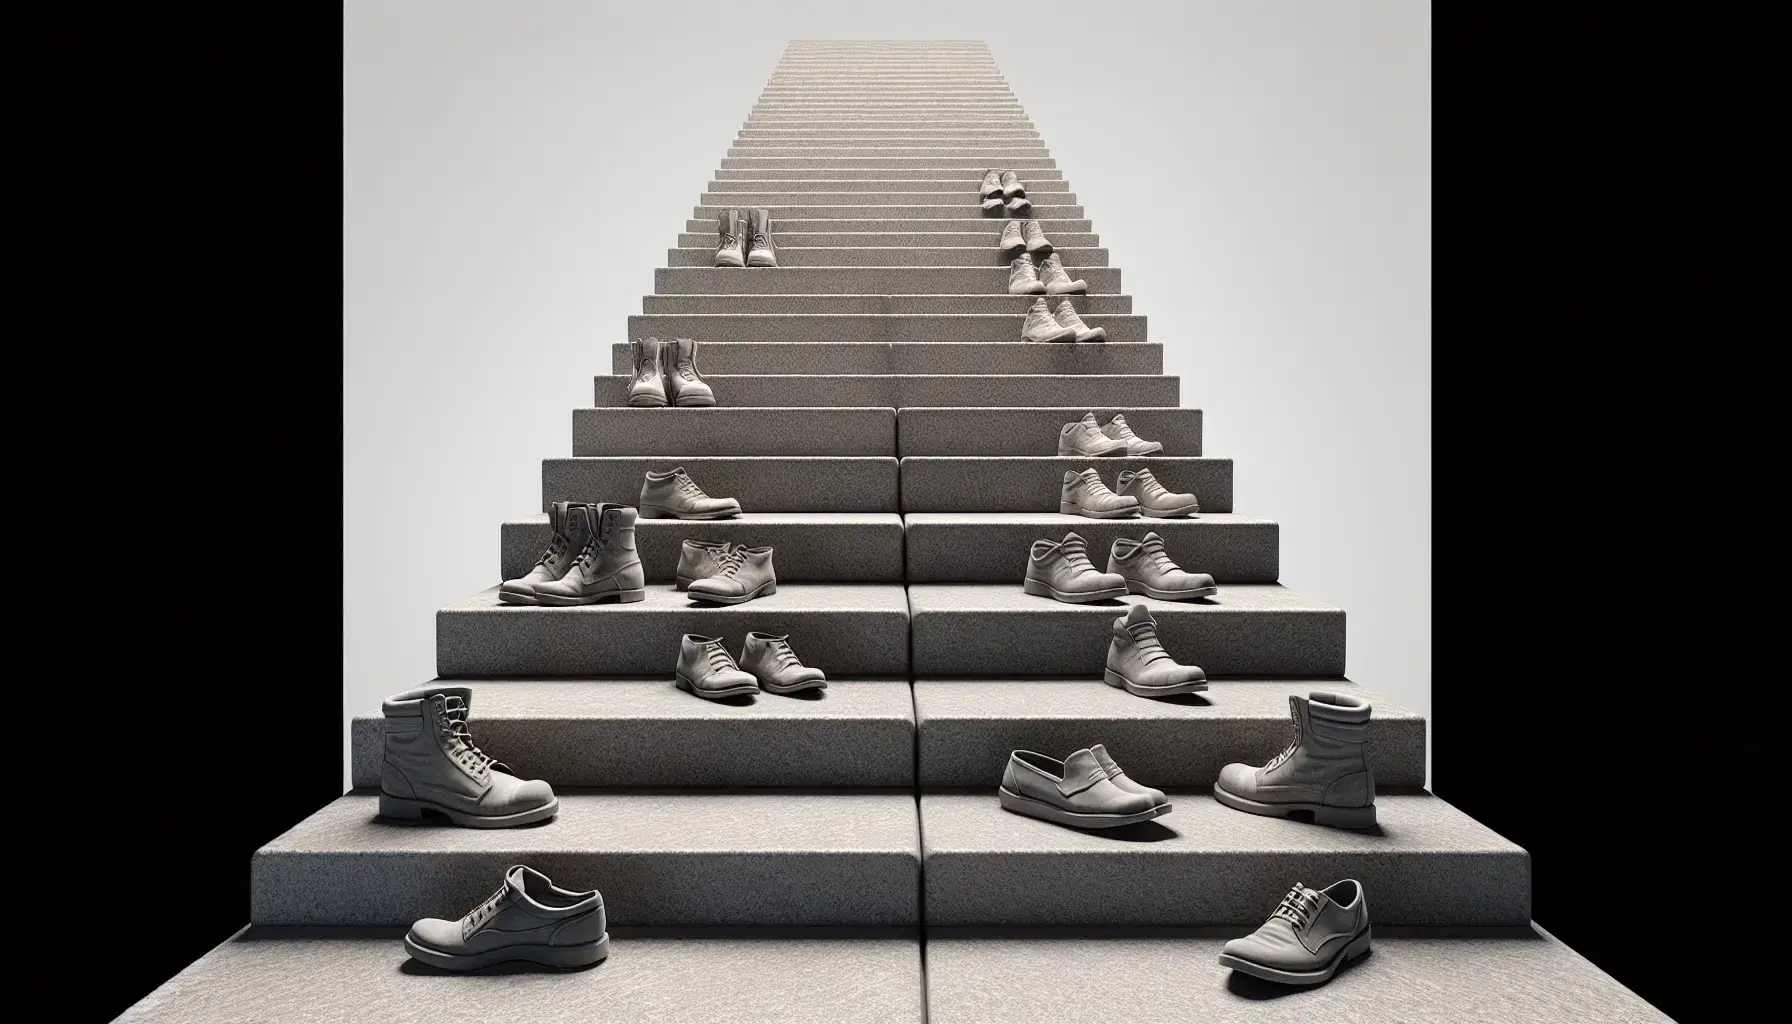 Ascending stone staircase with varied pairs of shoes on each step, from worn work boots to elegant high heels, against a gradient backdrop.